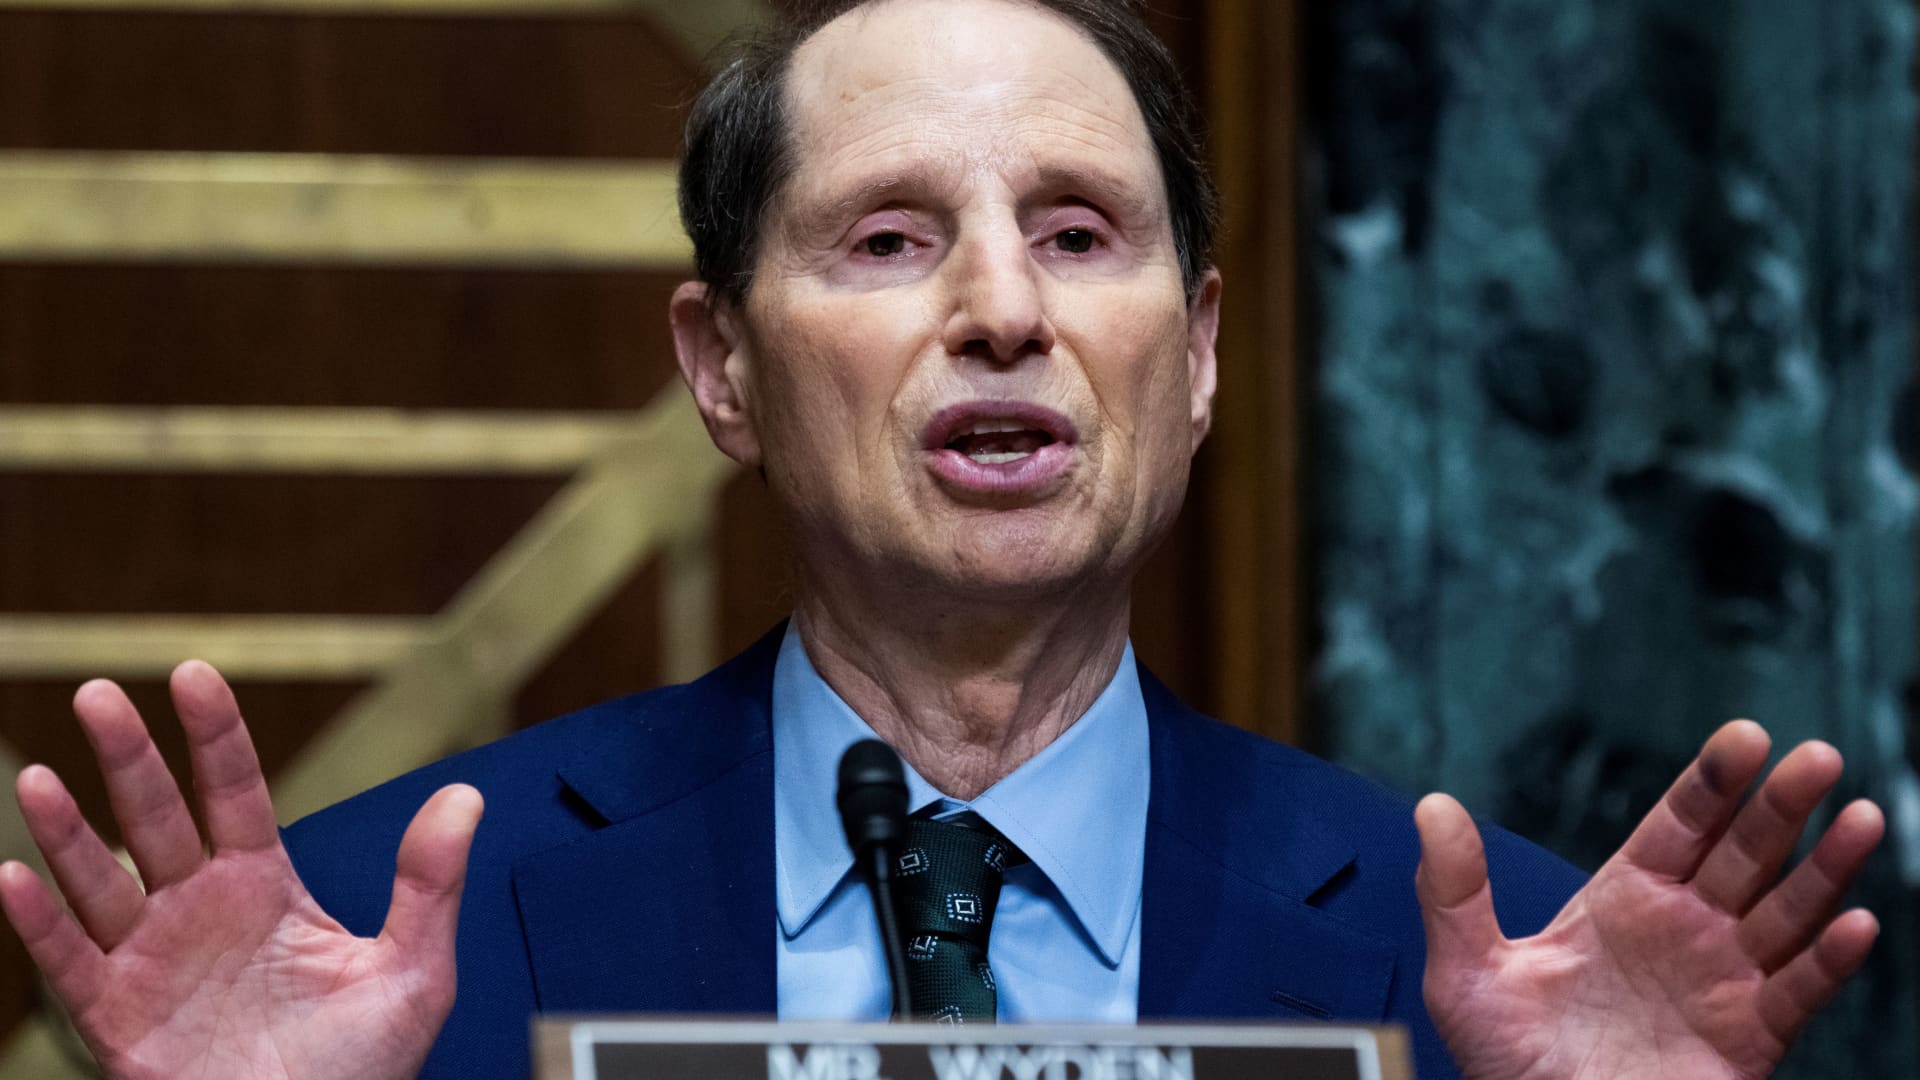 IRS commissioner nominee to 'ensure that America's highest earners comply with tax laws.' Here are the key takeaways from Senate hearing